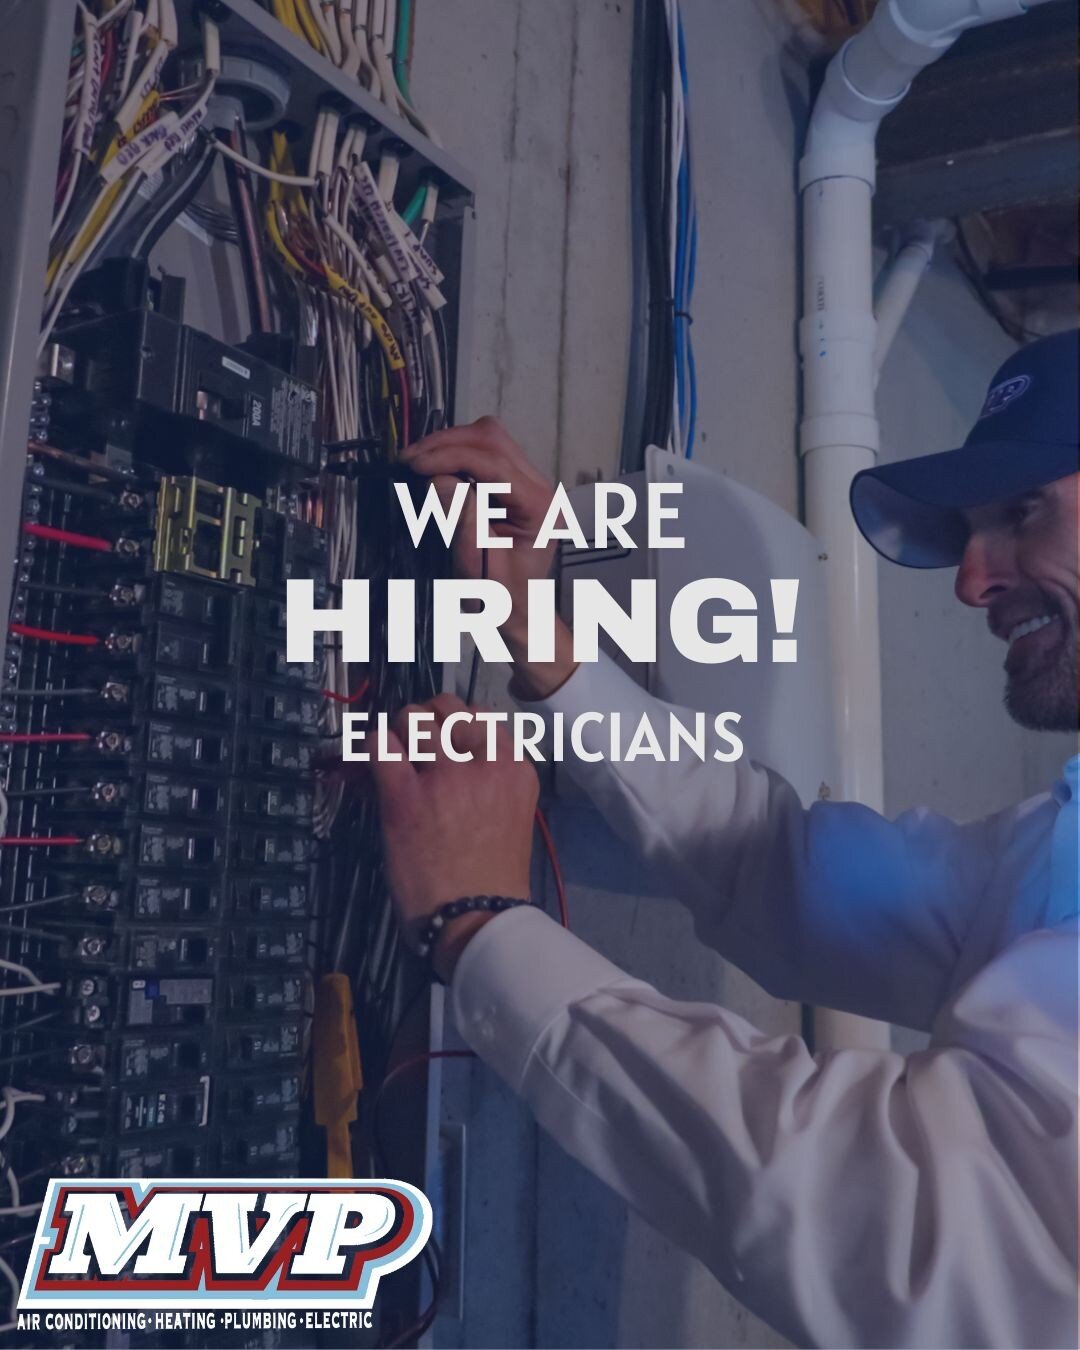 WE'RE HIRING! 🥇

MVP was voted one of Kansas City's best places to work by the Kansas City Business Journal 𝑨𝑵𝑫 voted Best Electricians in Kansas City and we're hiring motivated 𝙚𝙡𝙚𝙘𝙩𝙧𝙞𝙘𝙞𝙖𝙣𝙨 with 2 or more years experience! 

We have 